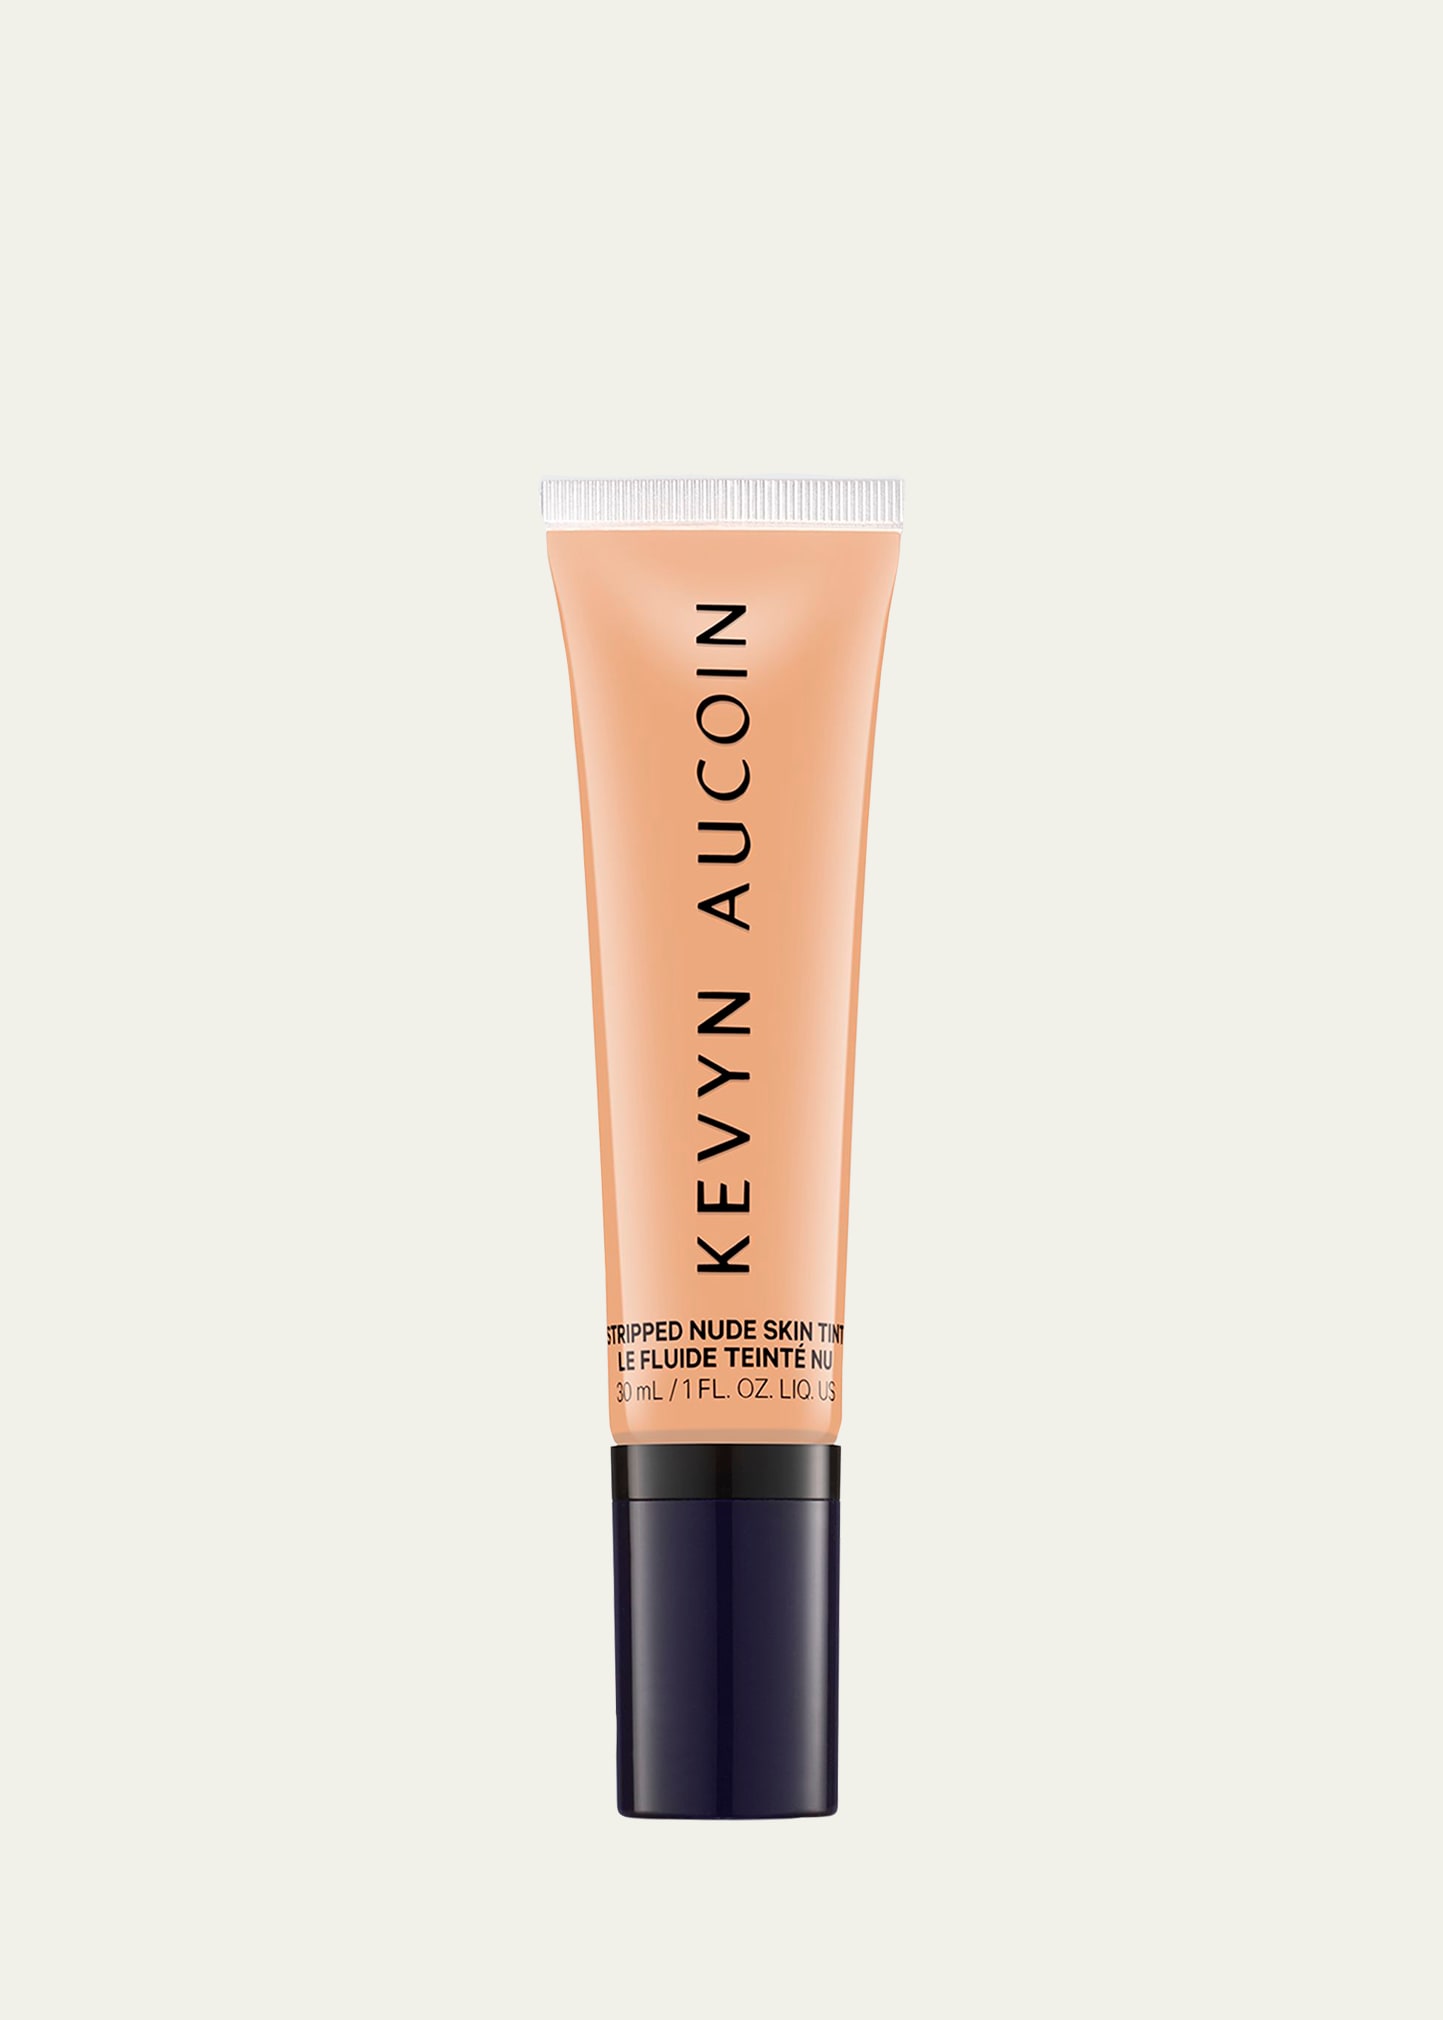 Kevyn Aucoin Stripped Nude Skin Tint In Neutral